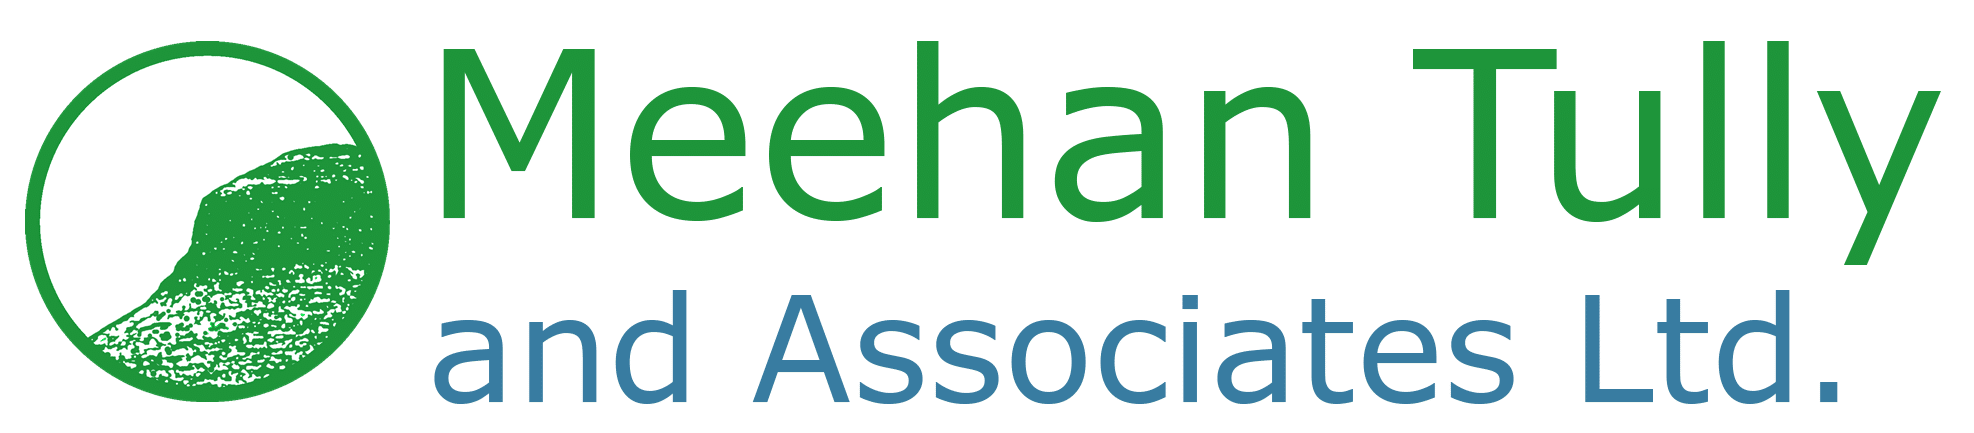 Meehan Tully and Associates Ltd.